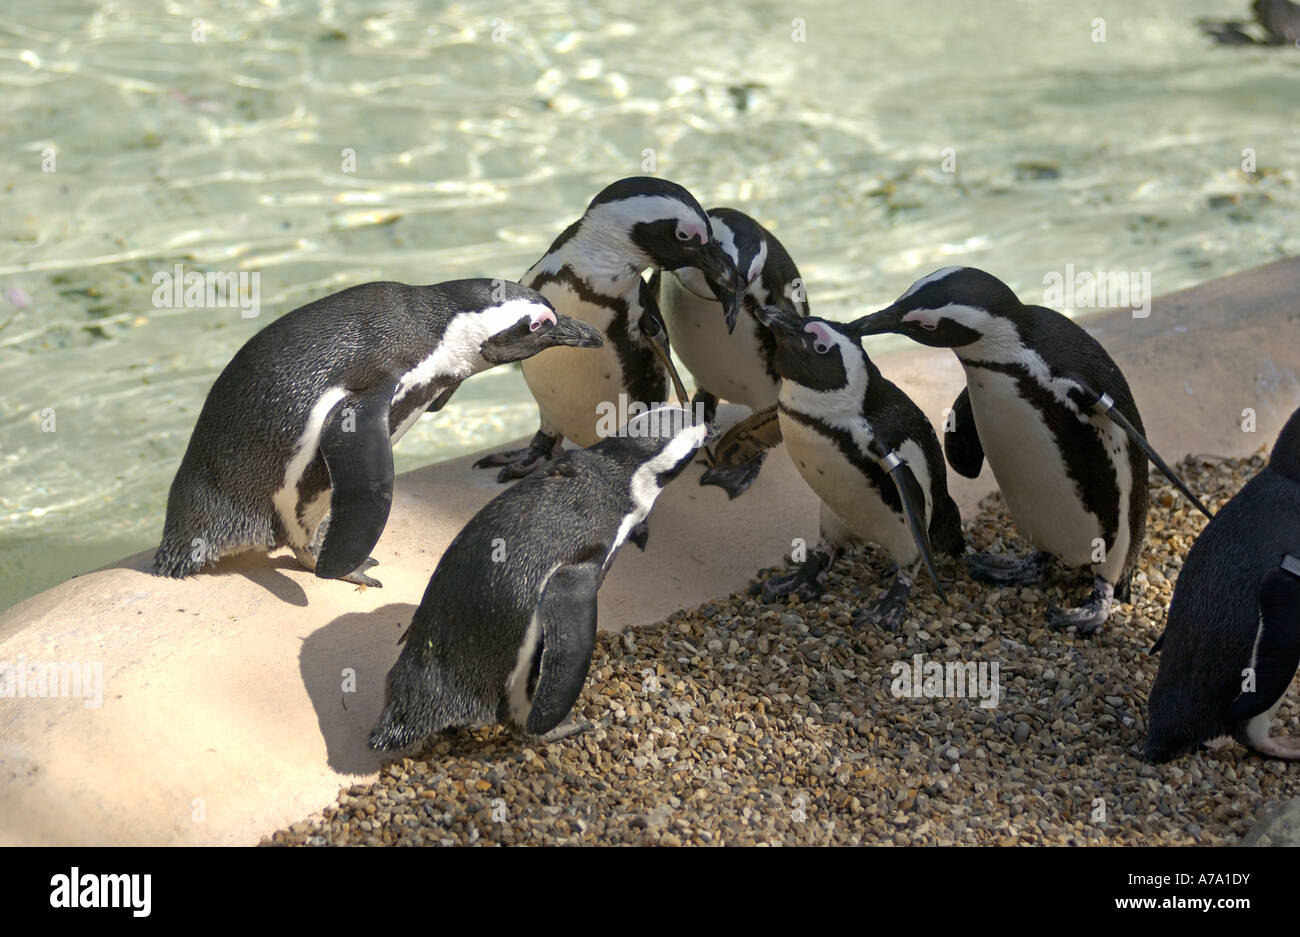 Blackfooted African “Jackass” Penguins in captivity have fun in the spring sunshine at a Zoo, England Stock Photo